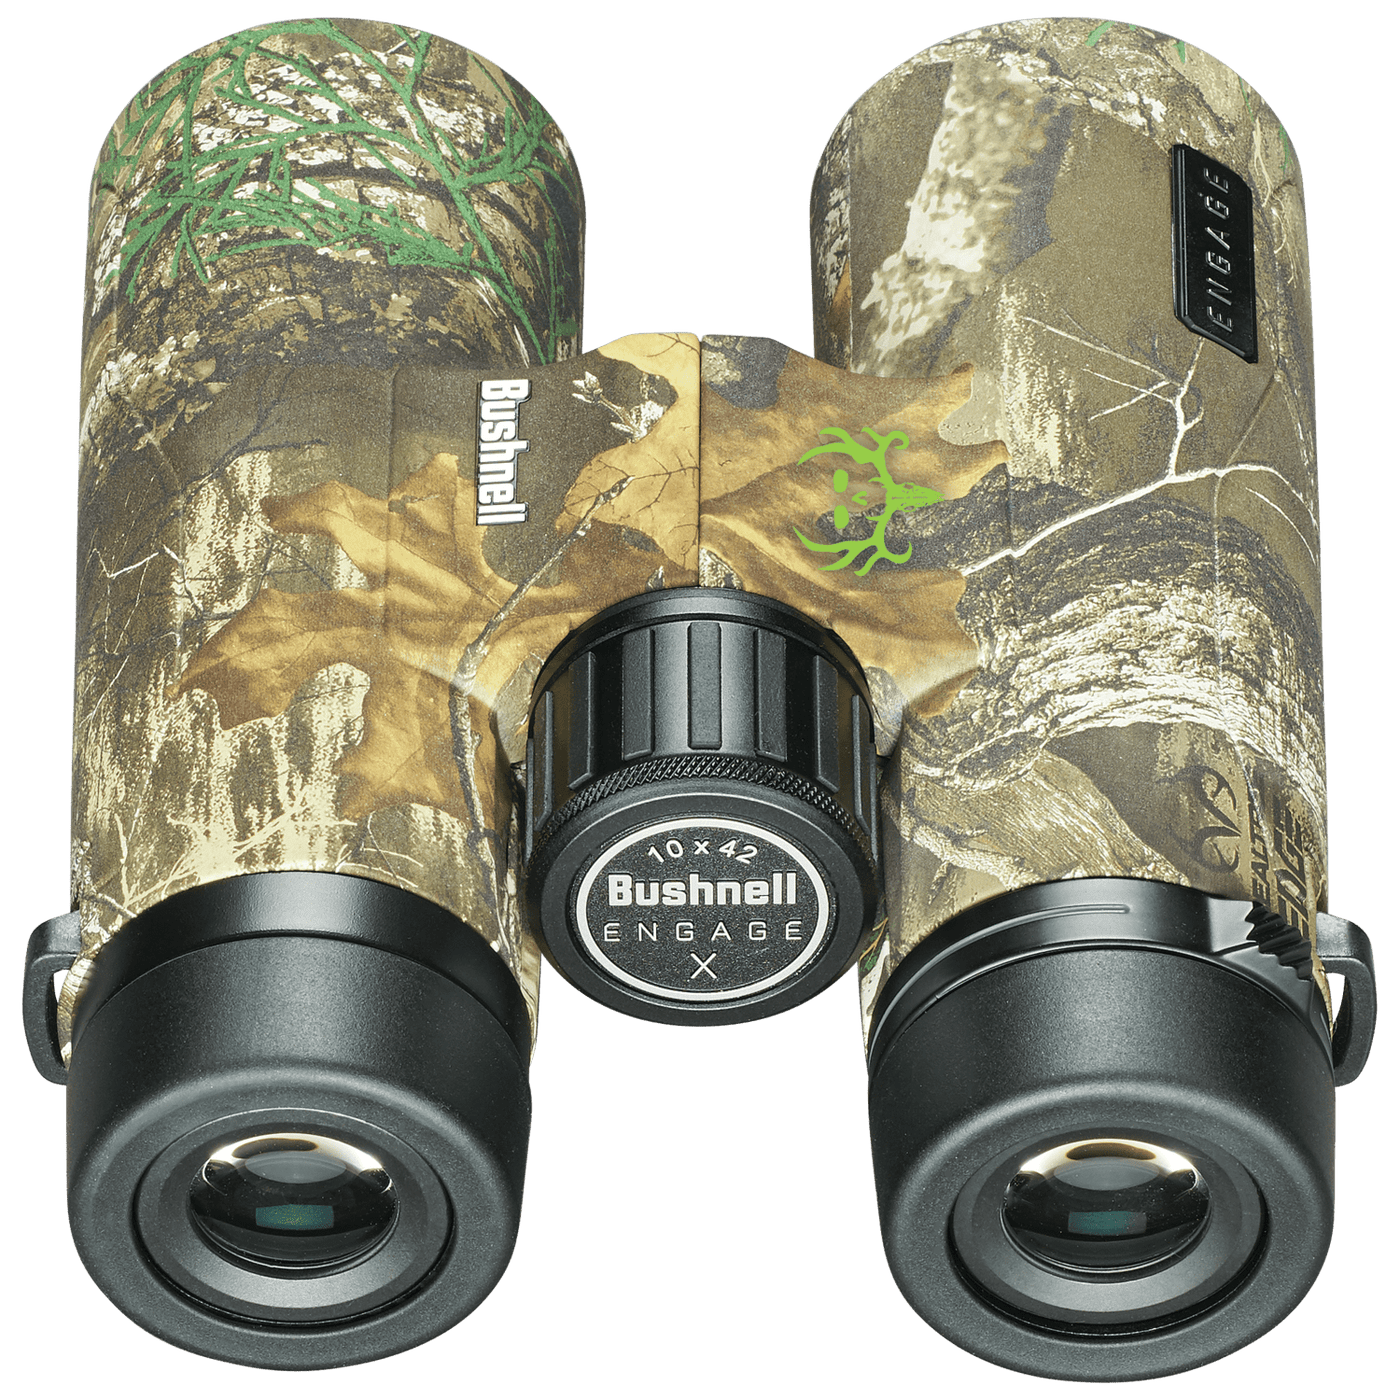 Bushnell Bushnell Engage X Binoculars Realtree Edge 10x42 Mm. Optics and Accessories